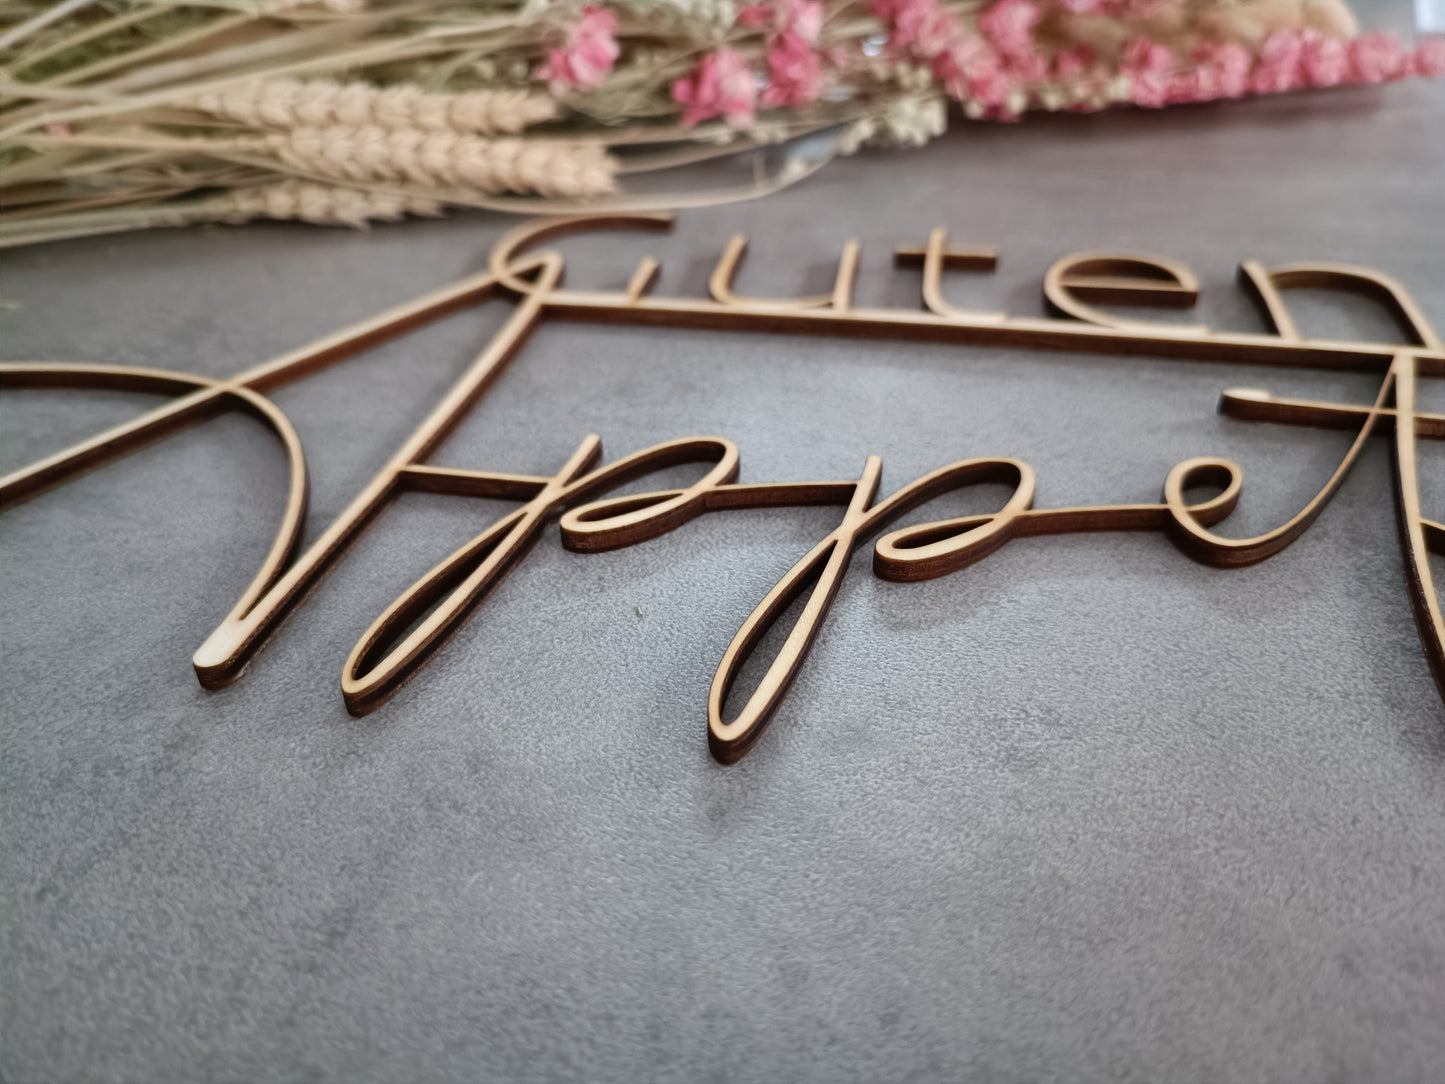 Bon Appetit lettering made of wood/lettering for kitchen/lettering for dining area/wall decoration/lettering for the wall